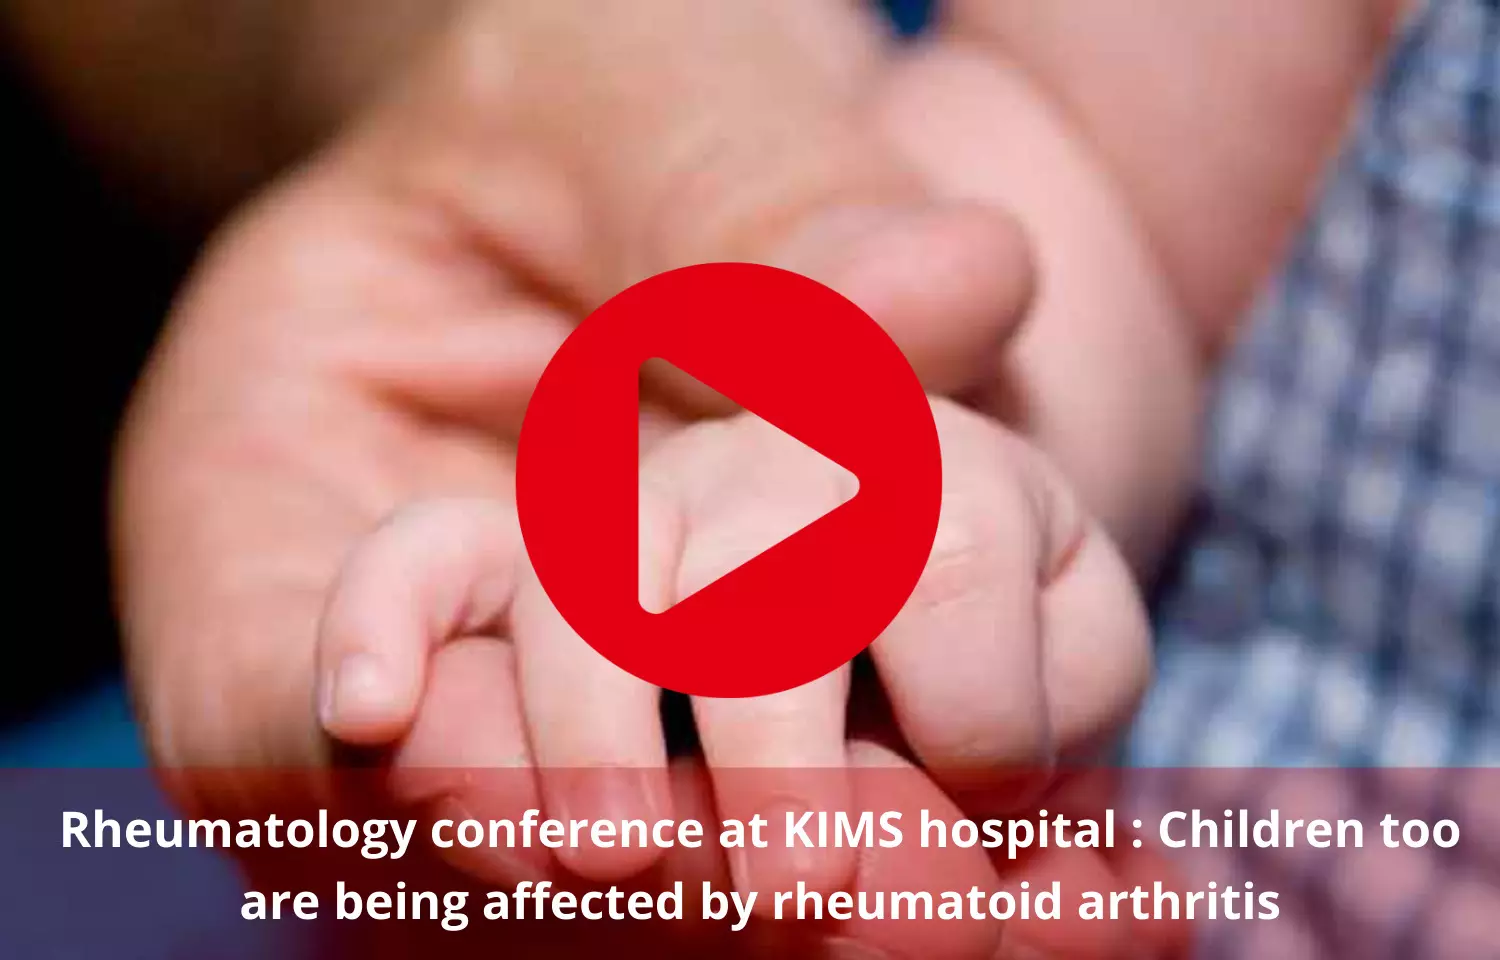 Rheumatology conference at KIMS hospital: Children too are being affected by rheumatoid arthritis